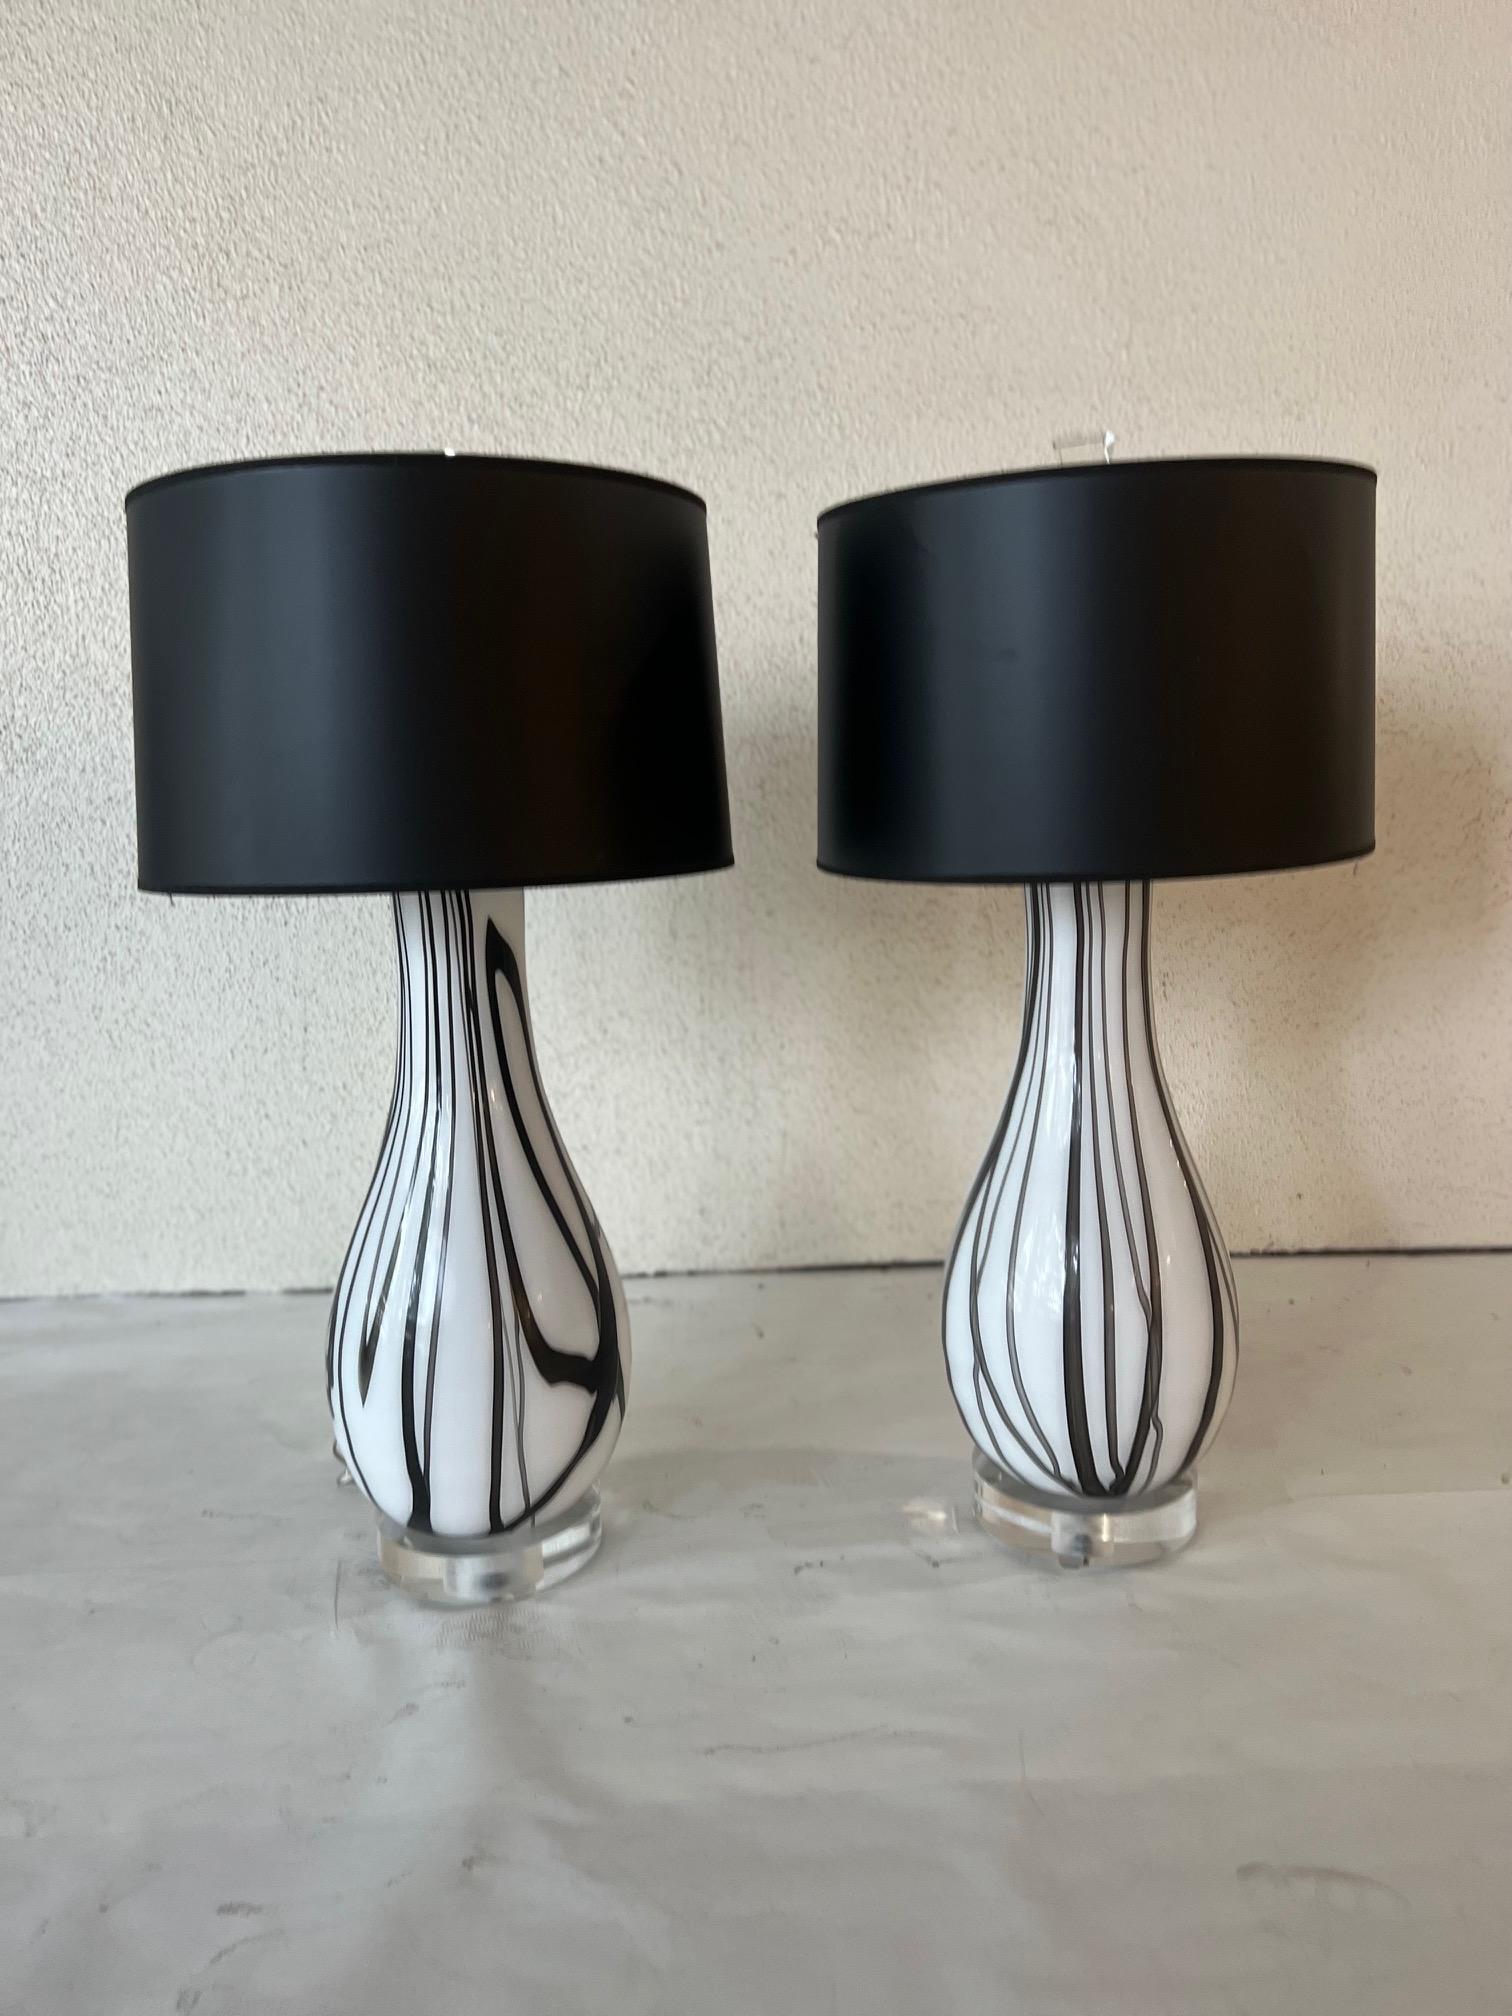 A pair of custom venetian glass lamps in black and white with blacks shades trimmed in silver.